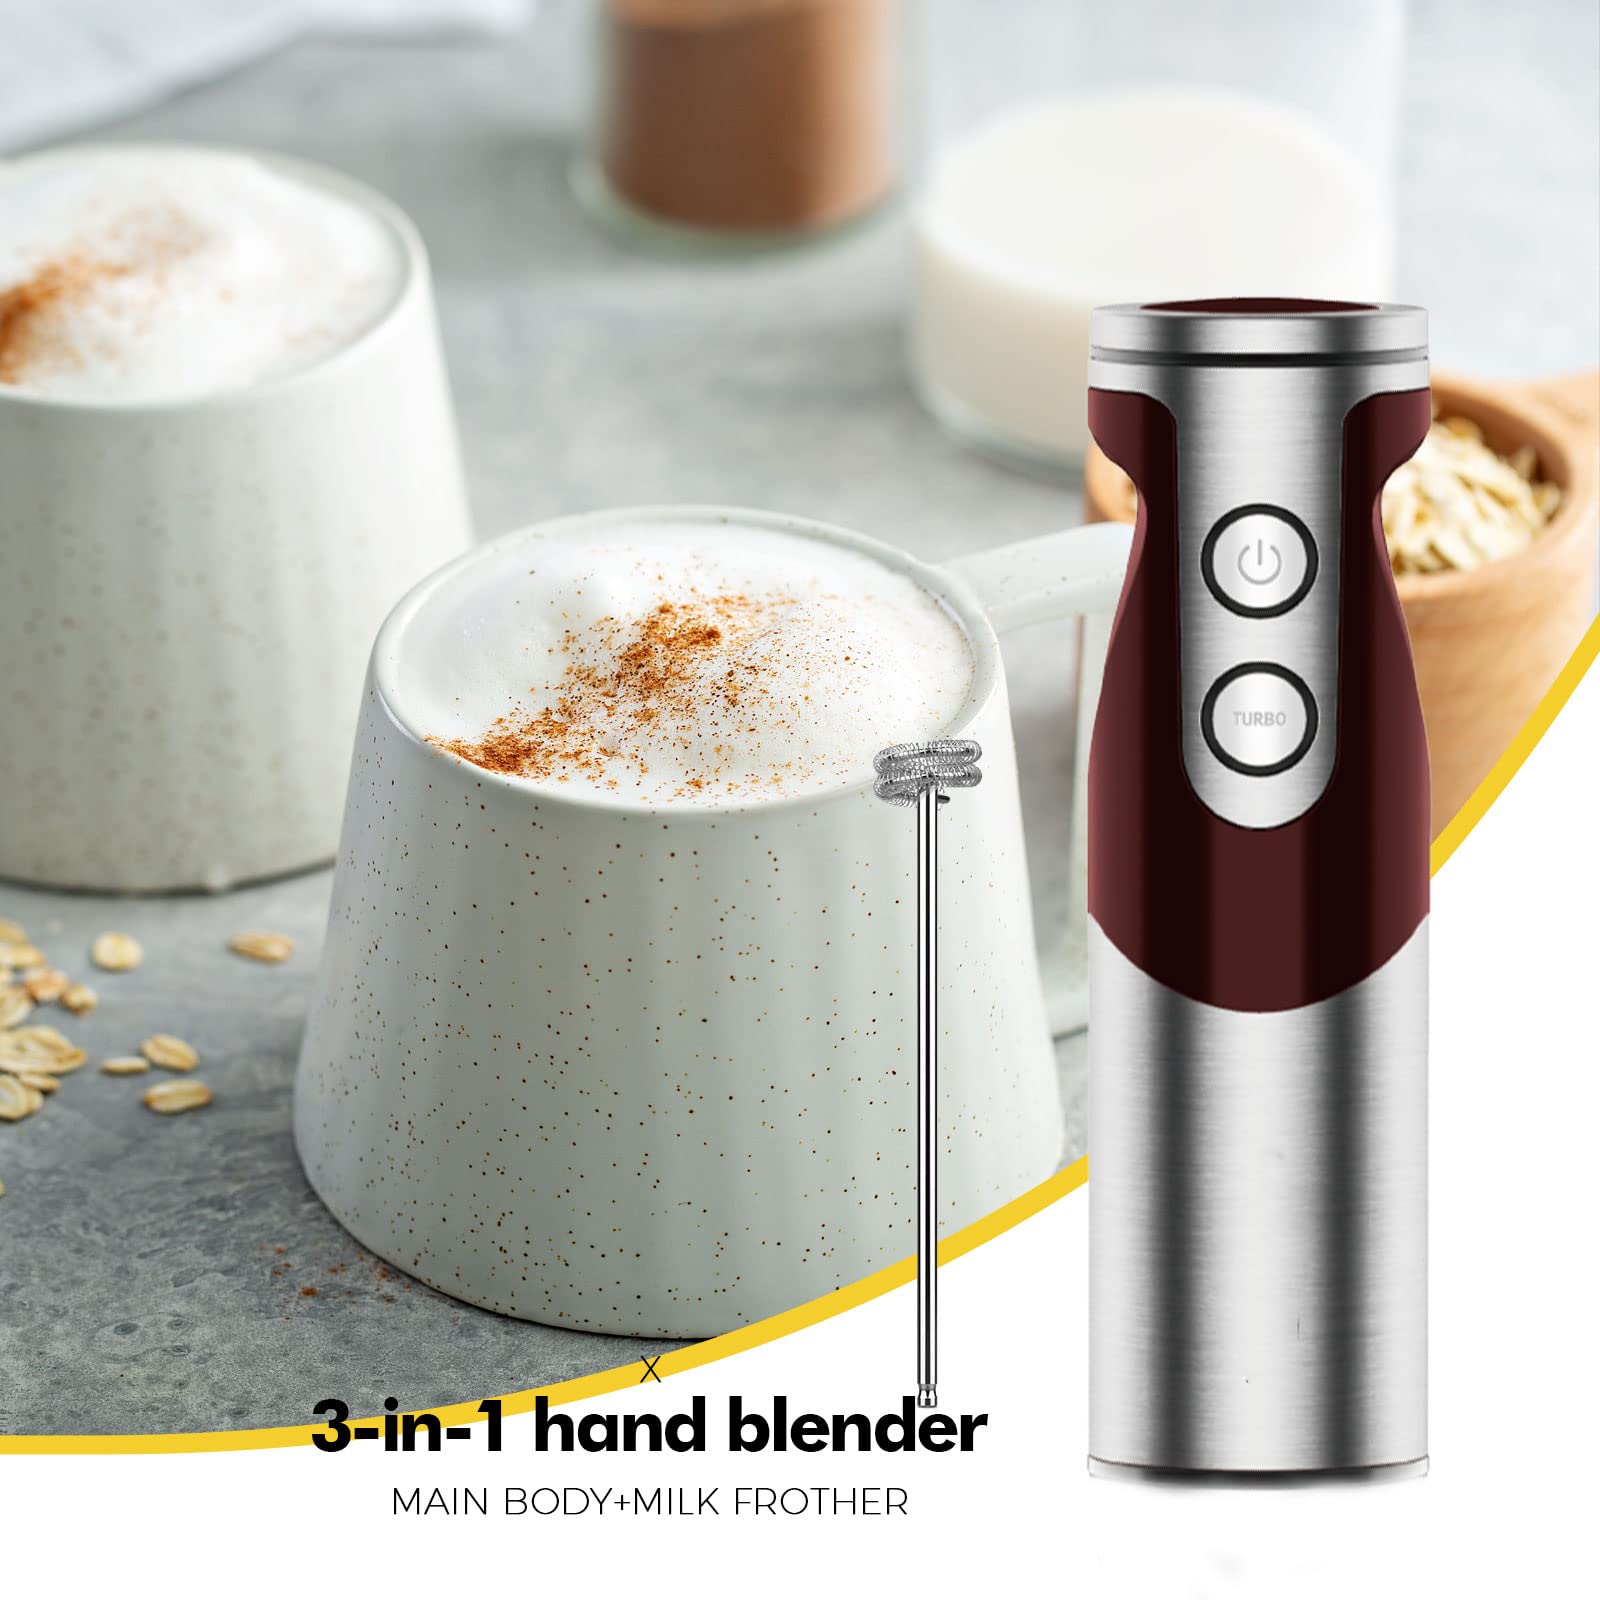 3- in-1 Immersion Hand blender, Powerful 1000W Stainless Steel Stick Blender, 4 Sharpe Blades with Whisk, Milk Frother Attachments